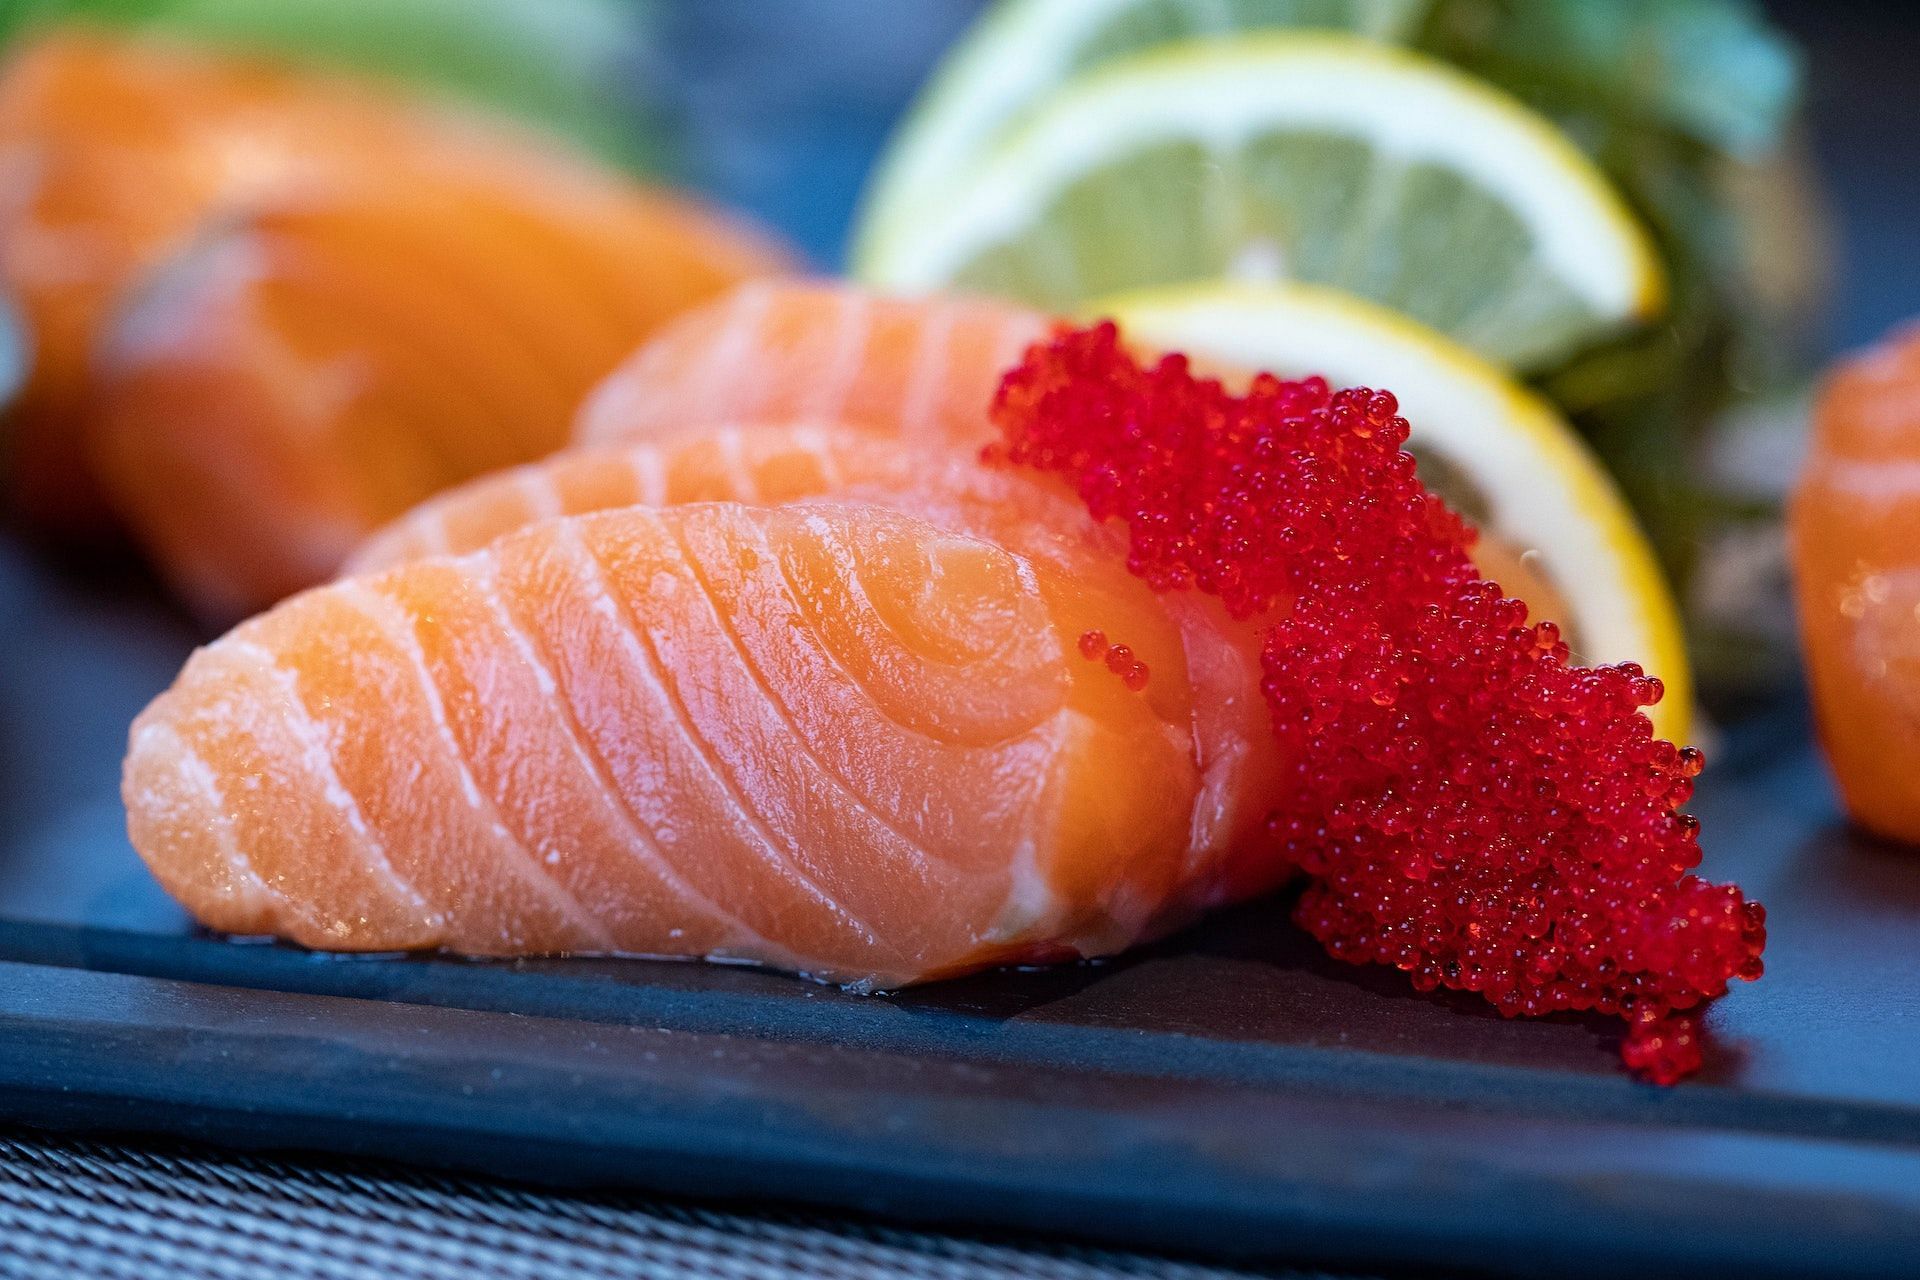 Salmon is a good source of high-calorie food that can help with weight gain and muscle mass.(Photo via Pexels/Valeria Boltneva)